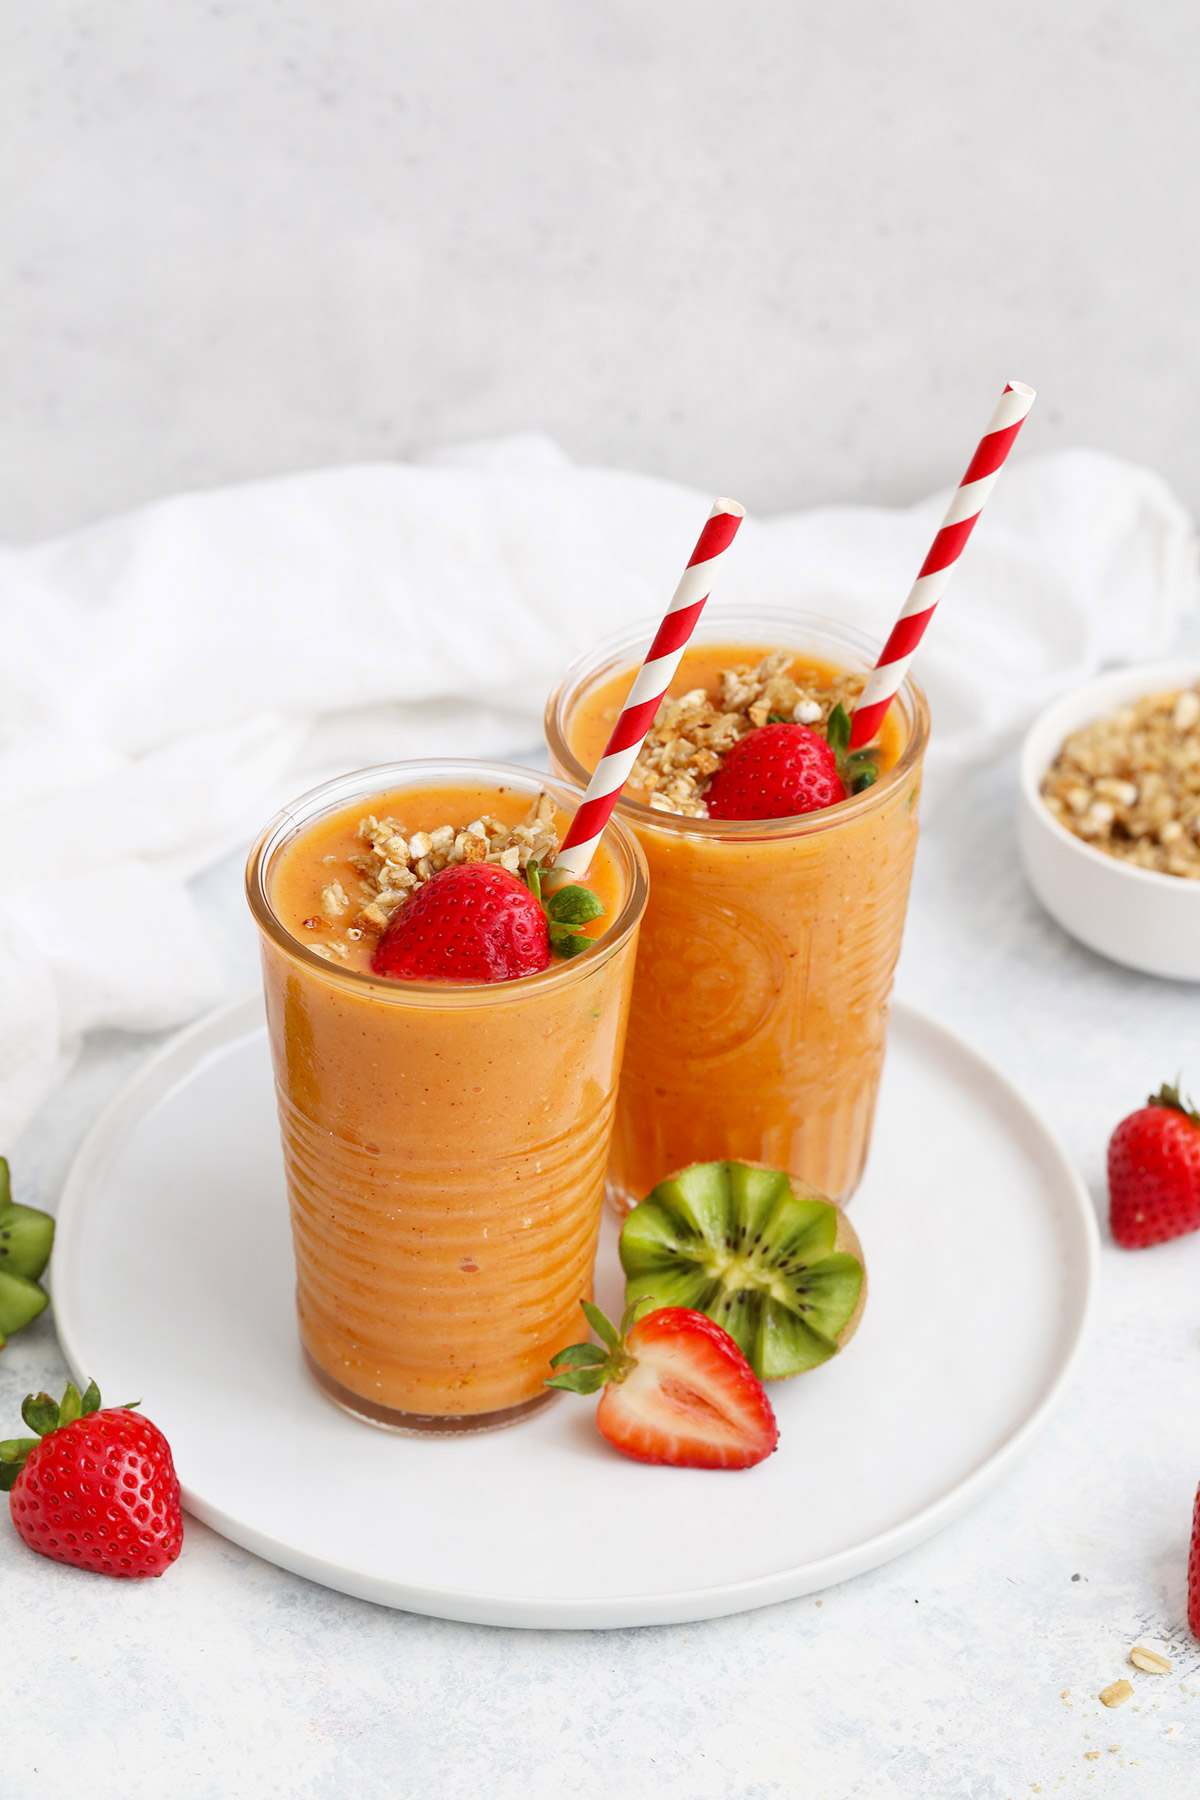 Strawberry Mango Smoothie from One Lovely Life